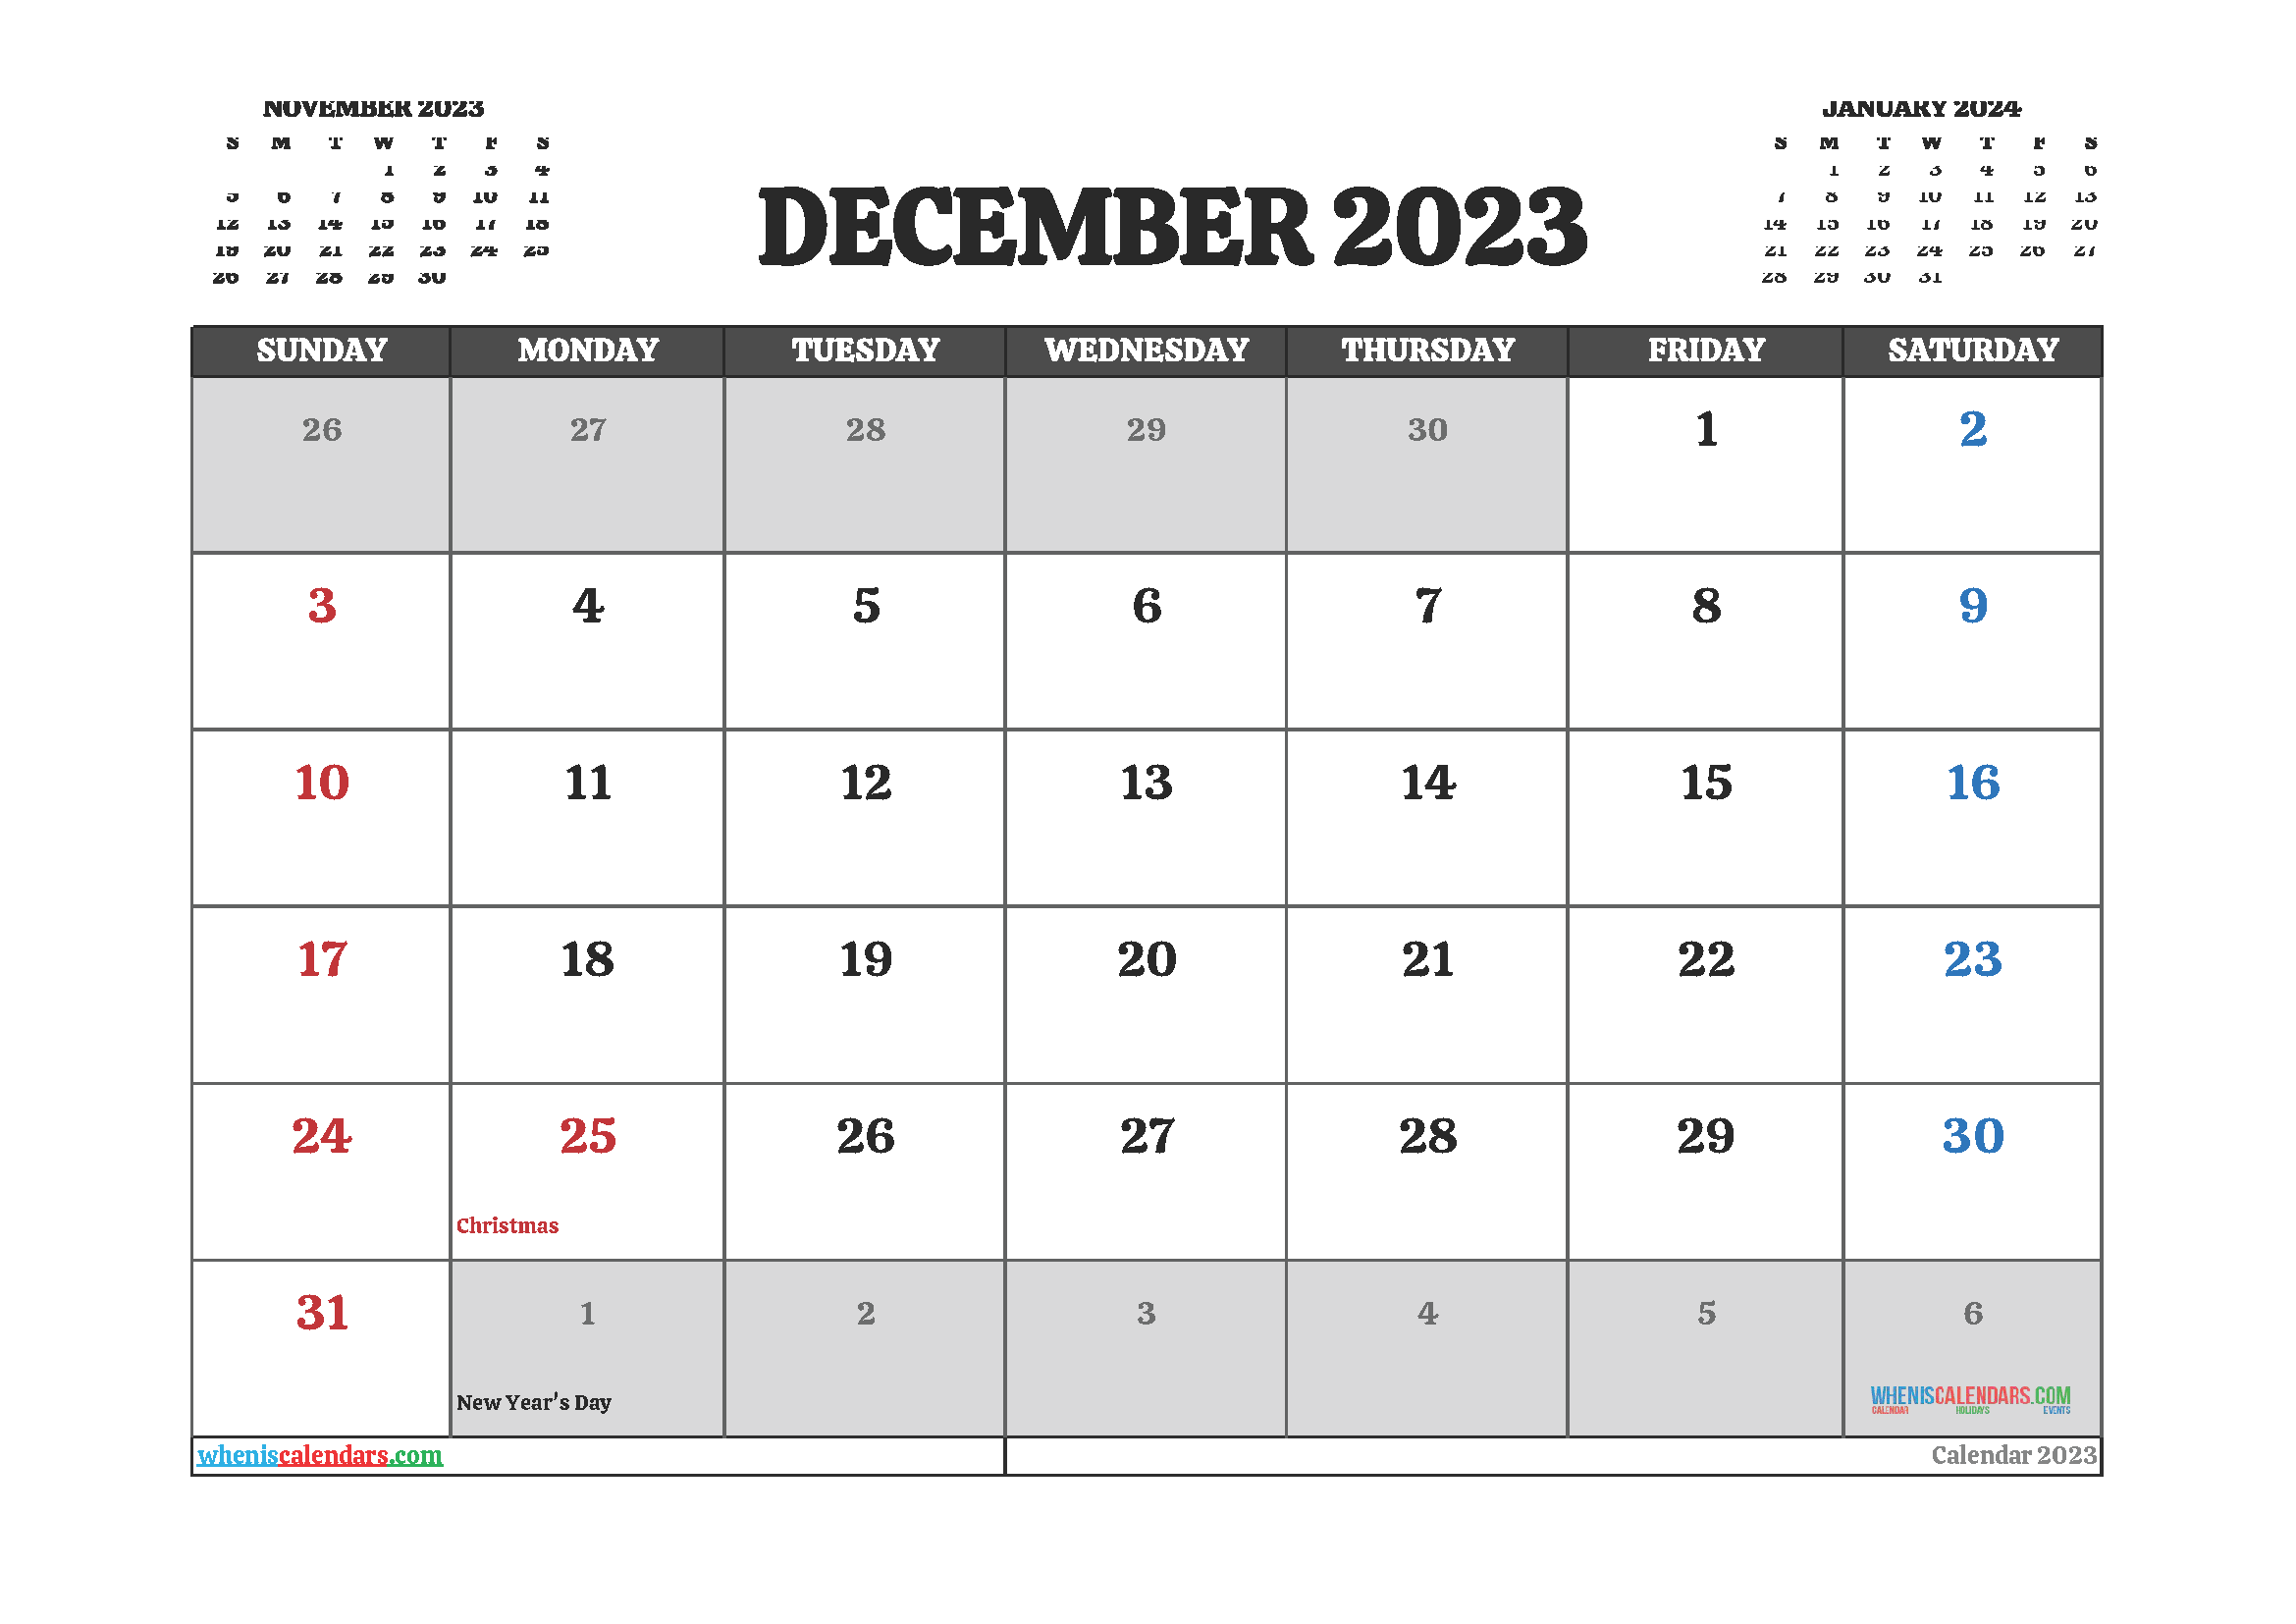 show-me-the-month-of-december-calendar-2023-best-amazing-list-of